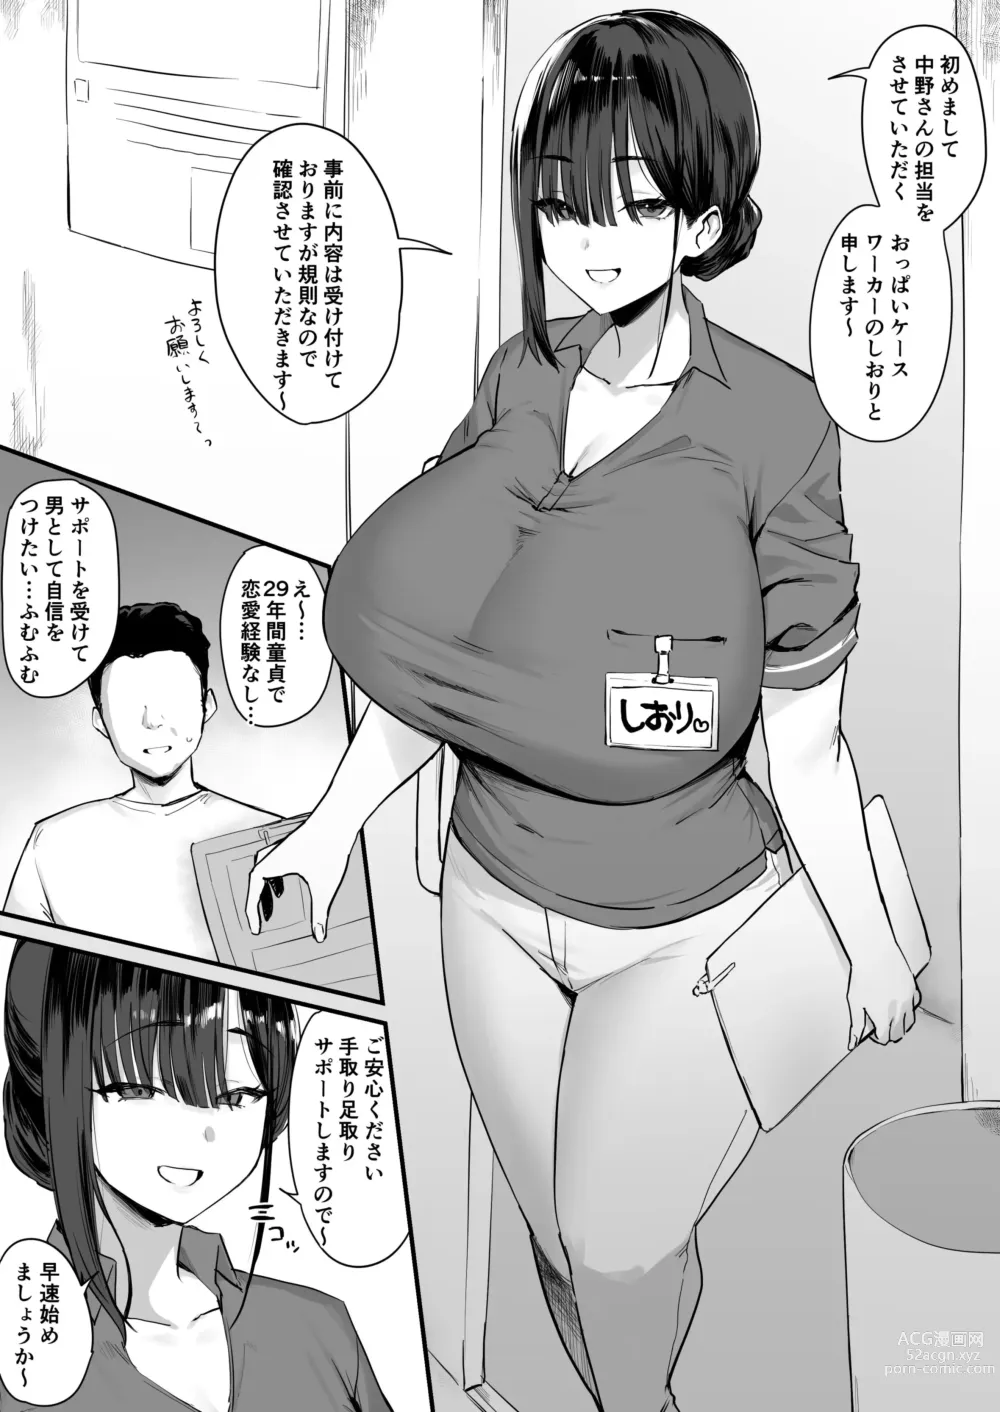 Page 1 of doujinshi Oppai Case Worker